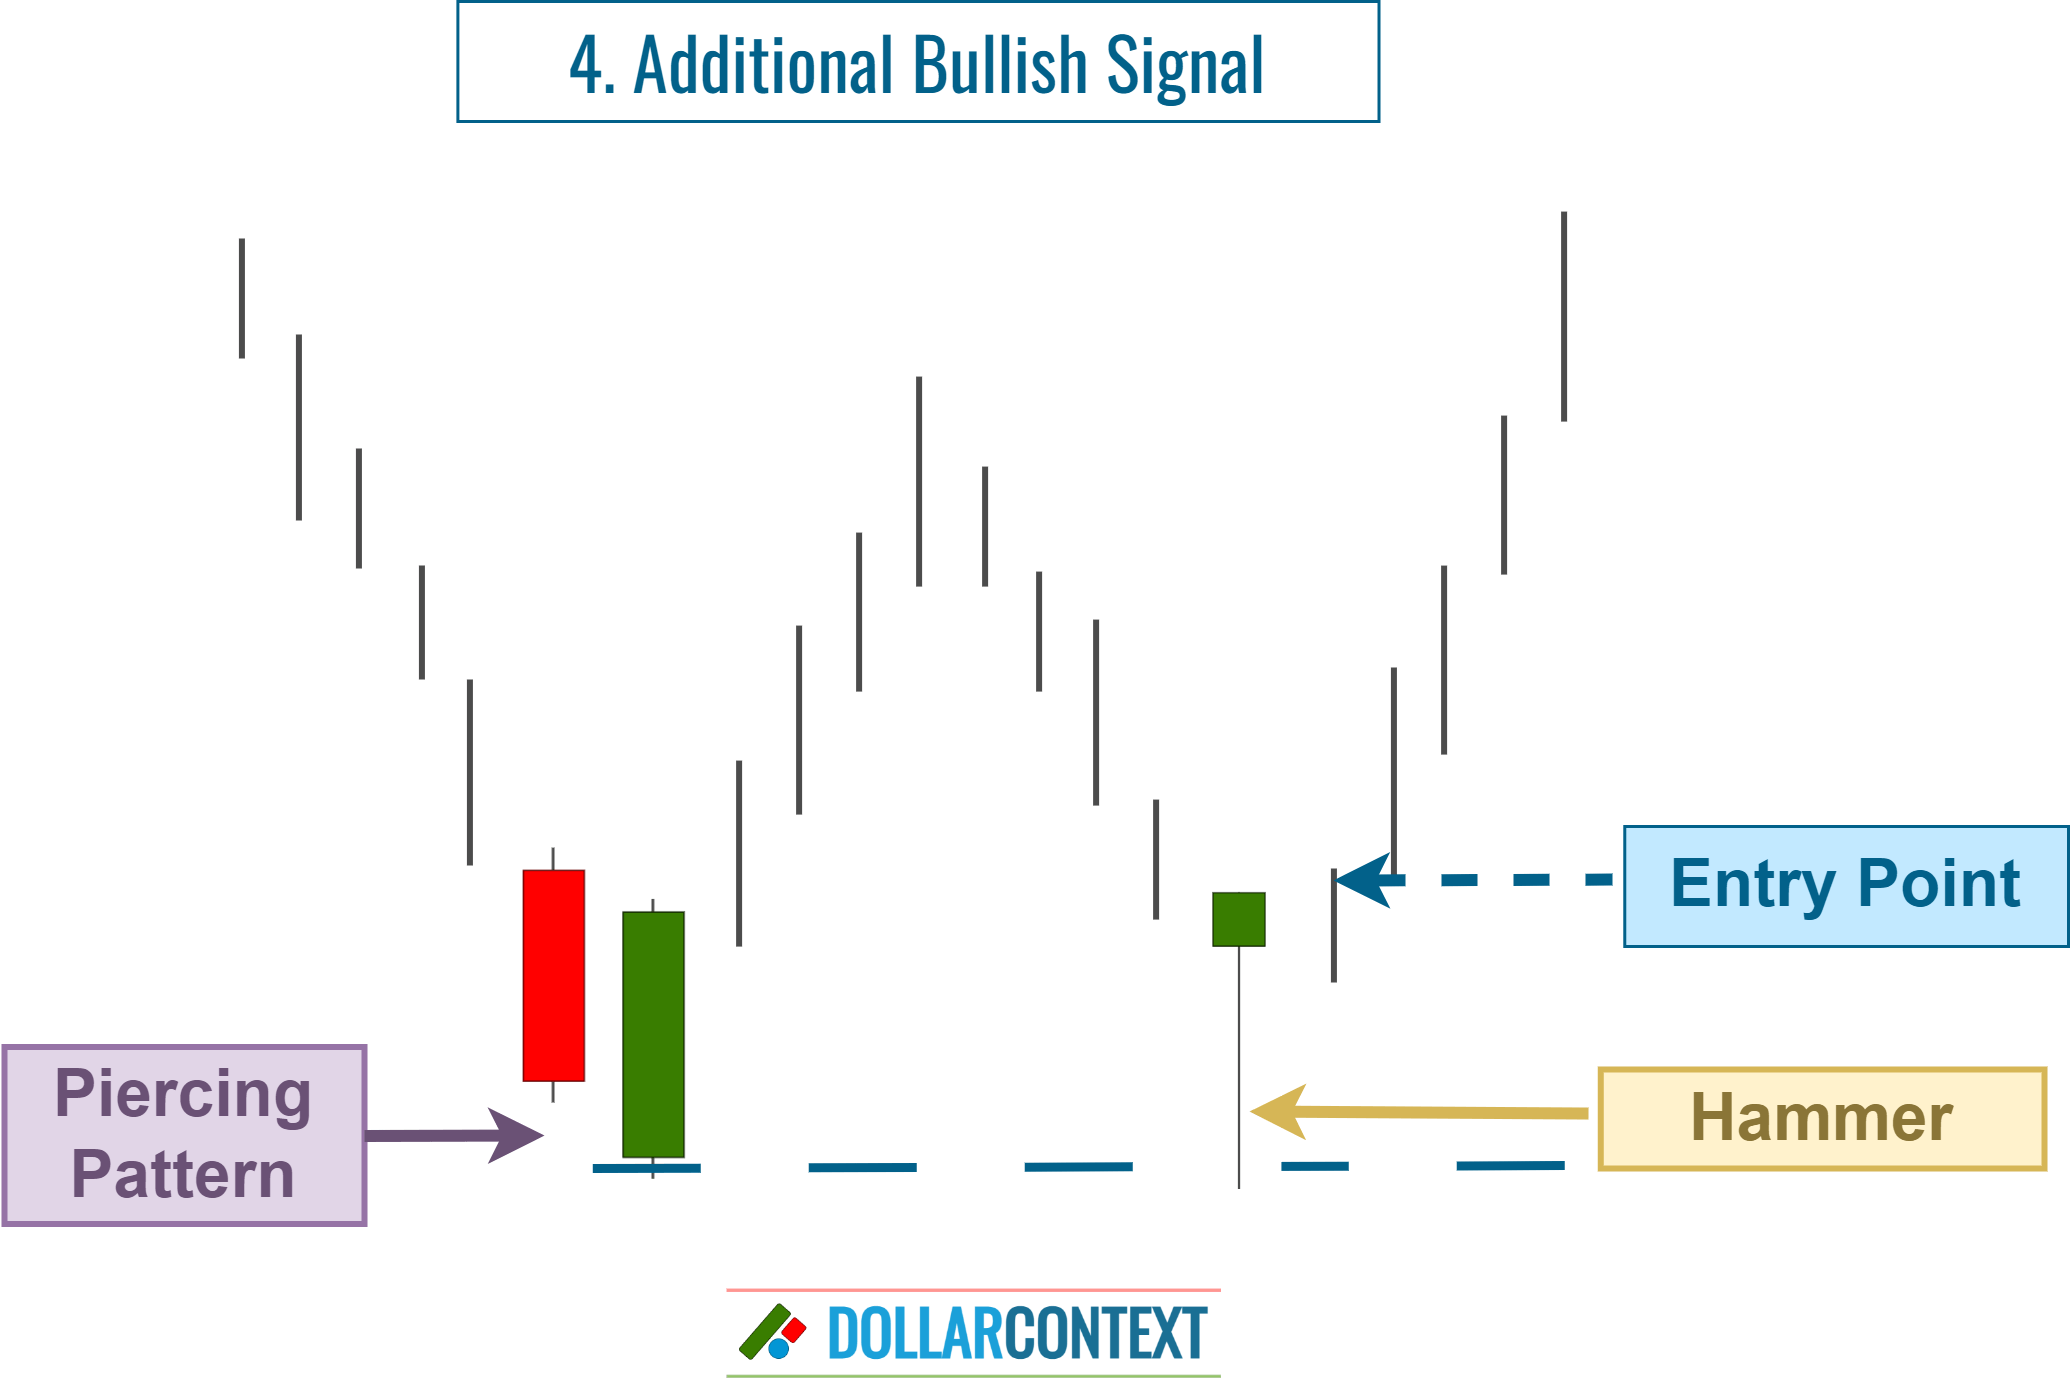 Piercing Pattern: Entry After Additional Bullish Signals